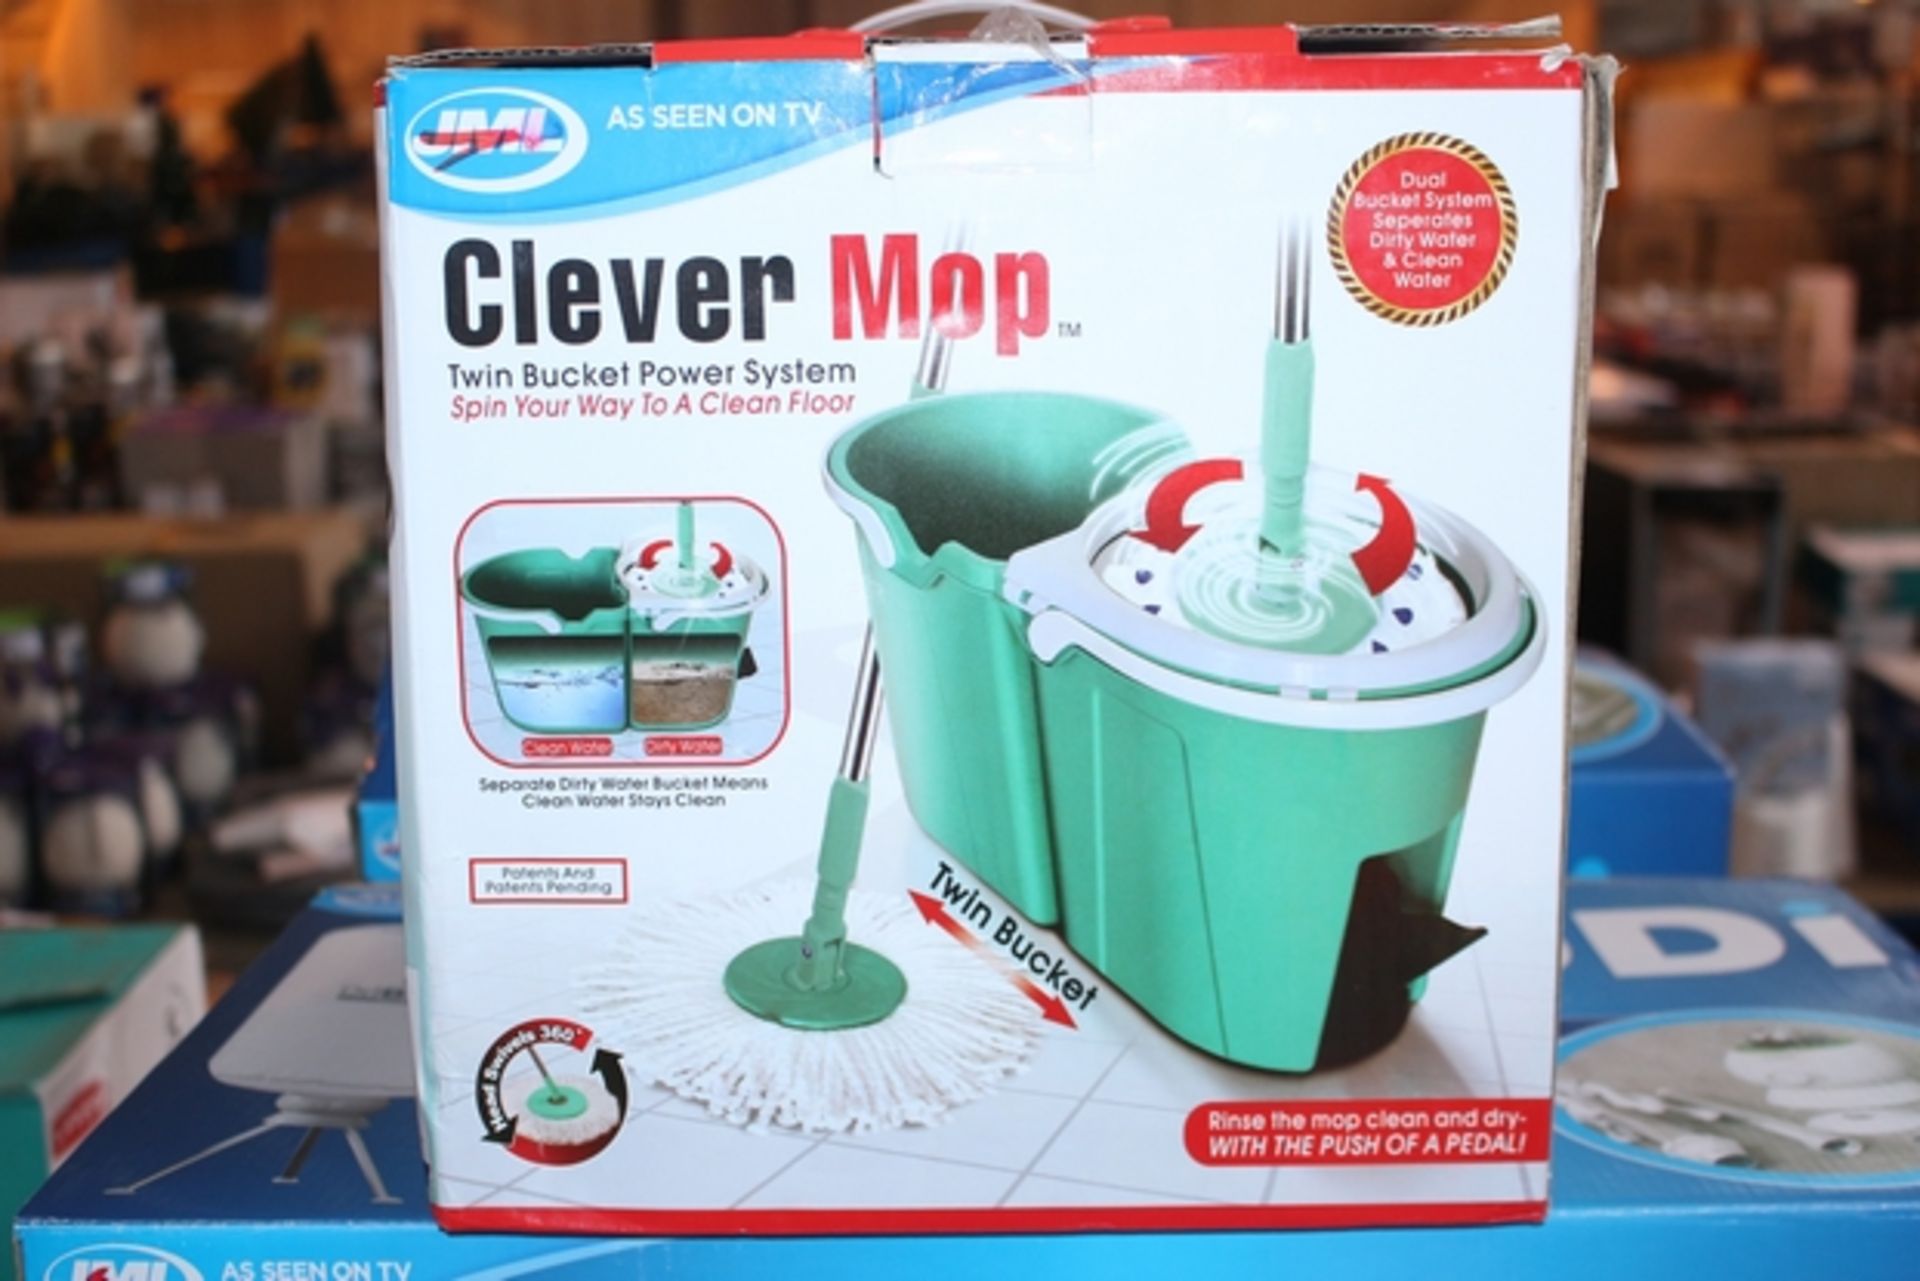 1X BOXED CLEVER MOP (AC-LMJ)